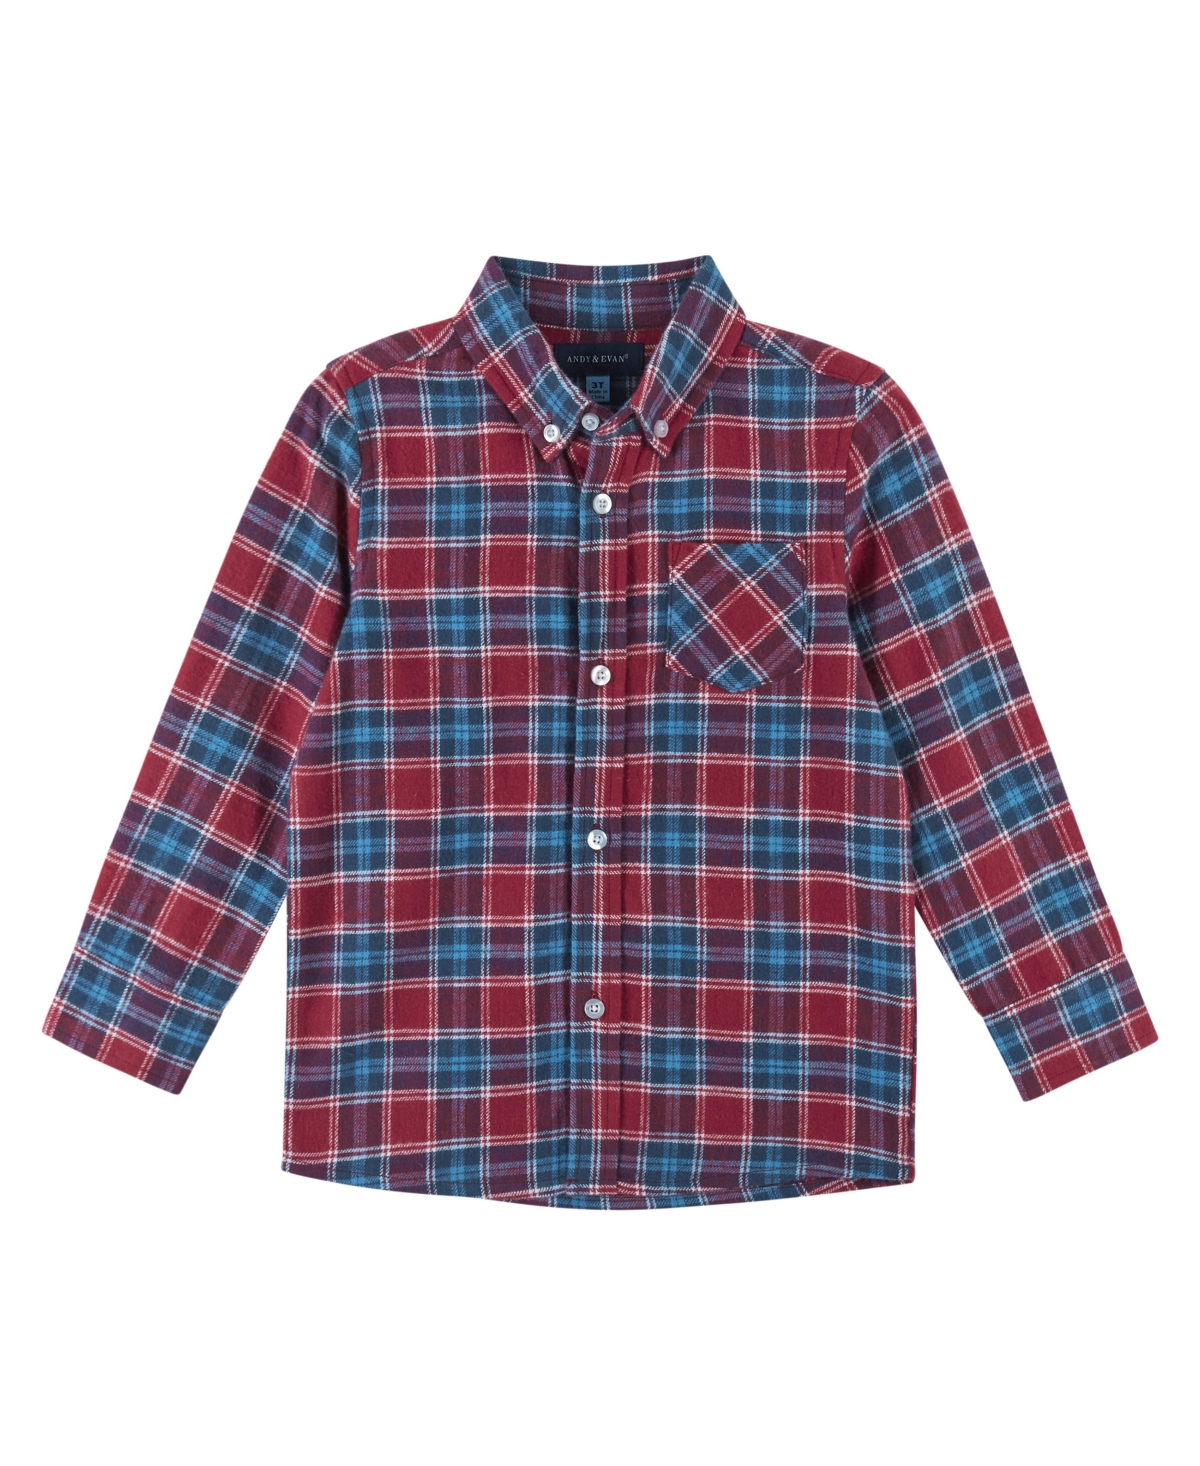 Andy & Evan Kids' Toddler/child Boys Textured Button Down Shirt In Red Blue Plaid